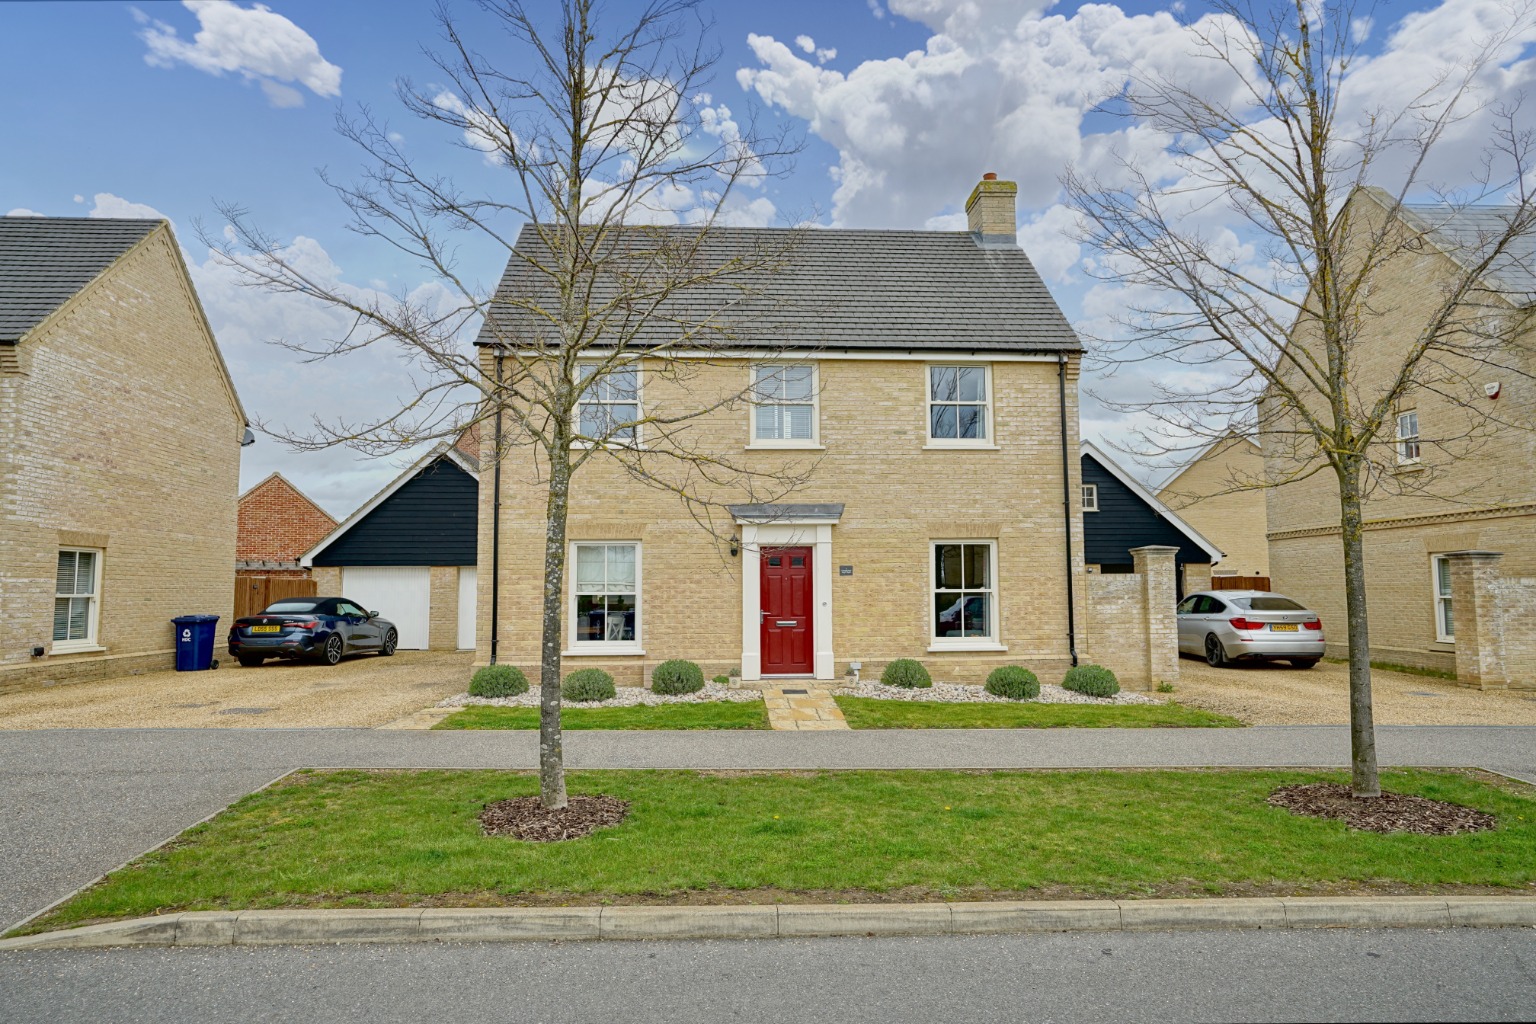 3 bed detached house for sale in Carnaile Road, Huntingdon - Property Image 1